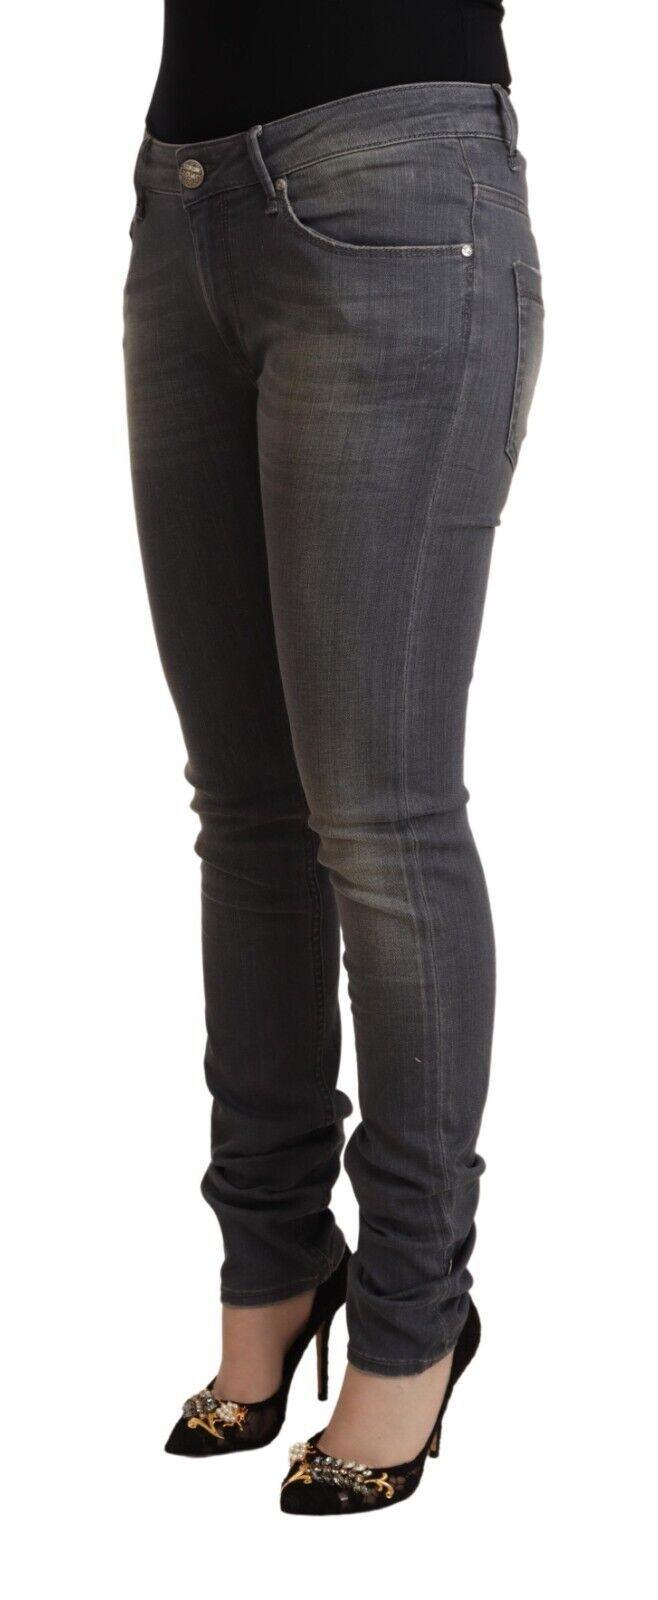 Dark Grey Washed Cotton Denim Skinny Jeans - Designed by Acht Available to Buy at a Discounted Price on Moon Behind The Hill Online Designer Discount Store